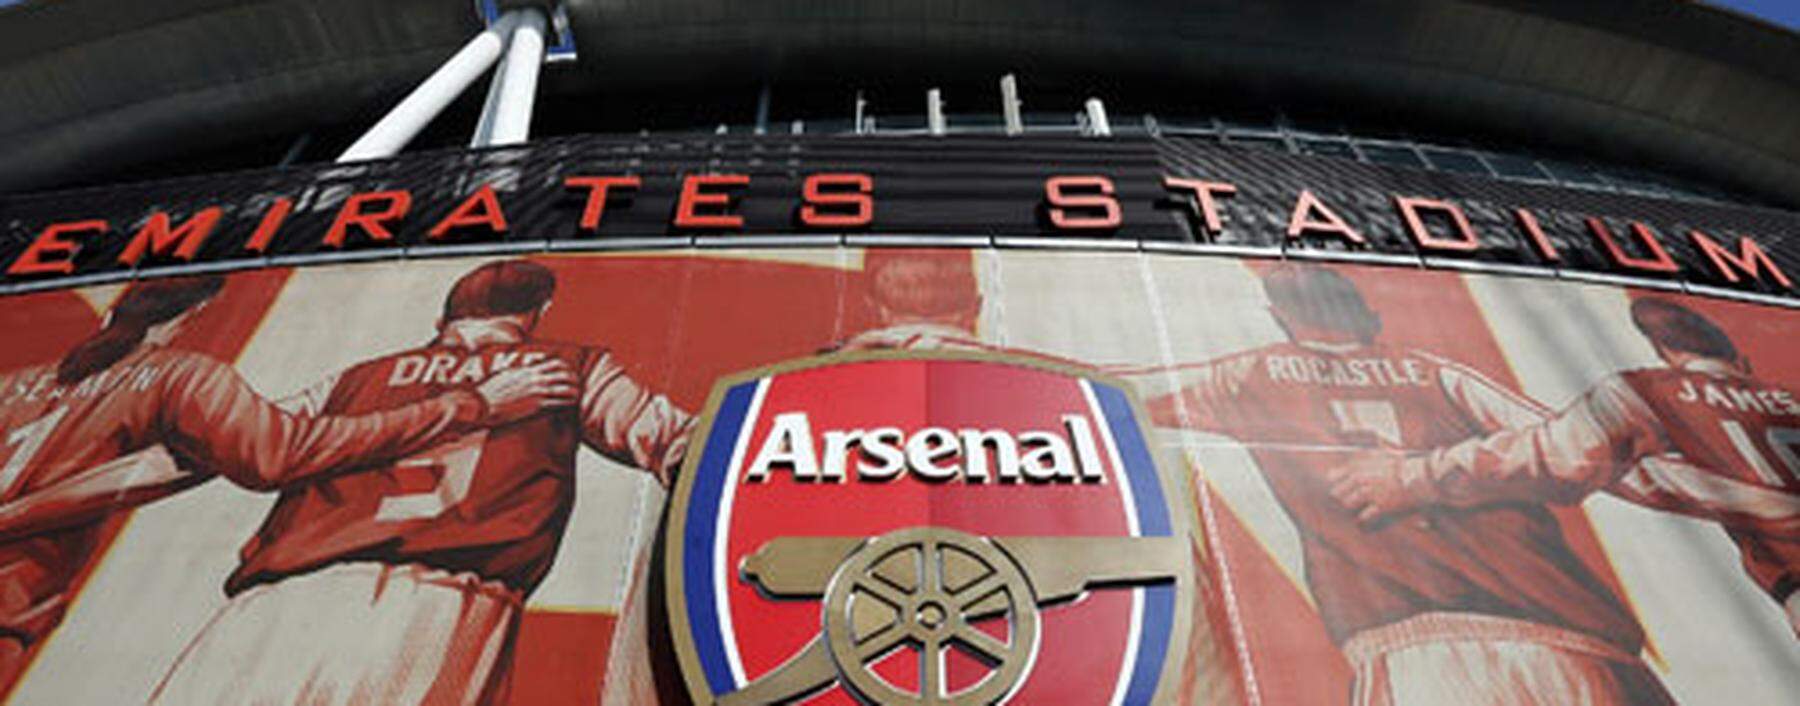 A general view shows the Emirates Stadium of soccer club Arsenal in London